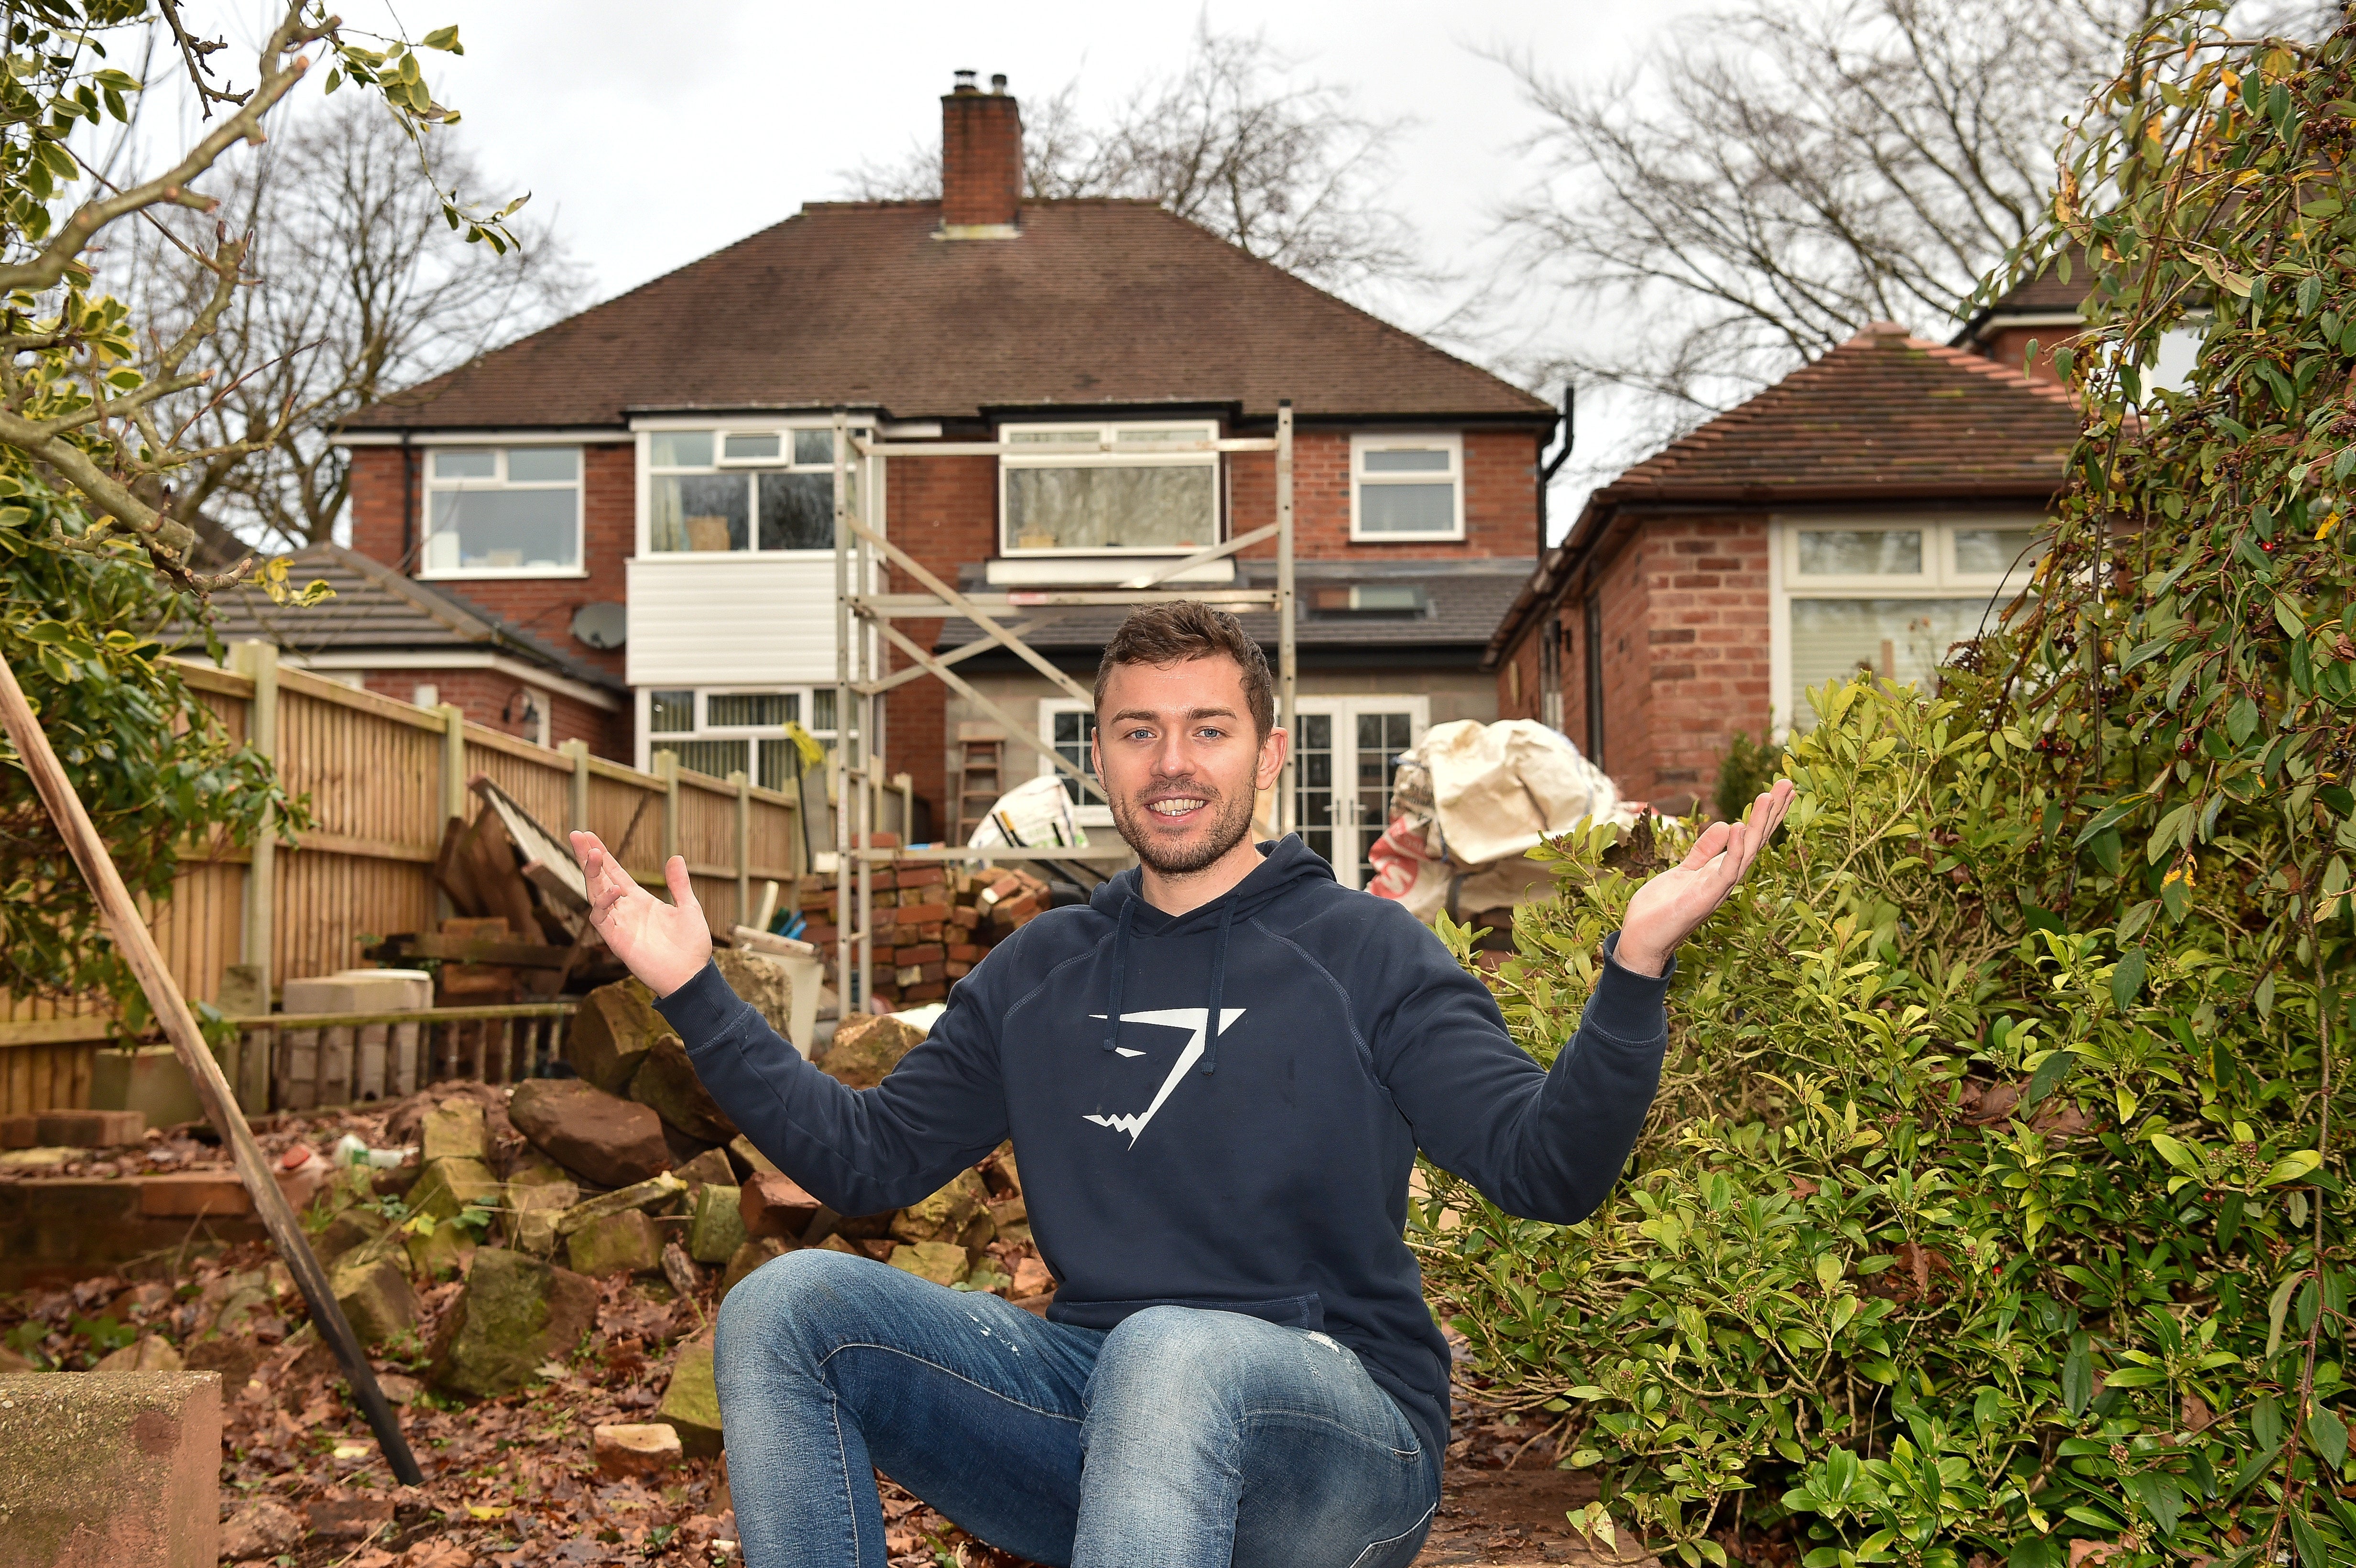 Scott Baggaley from Newcastle-under-Lyme near Stoke, who built his own extension using DIY videos